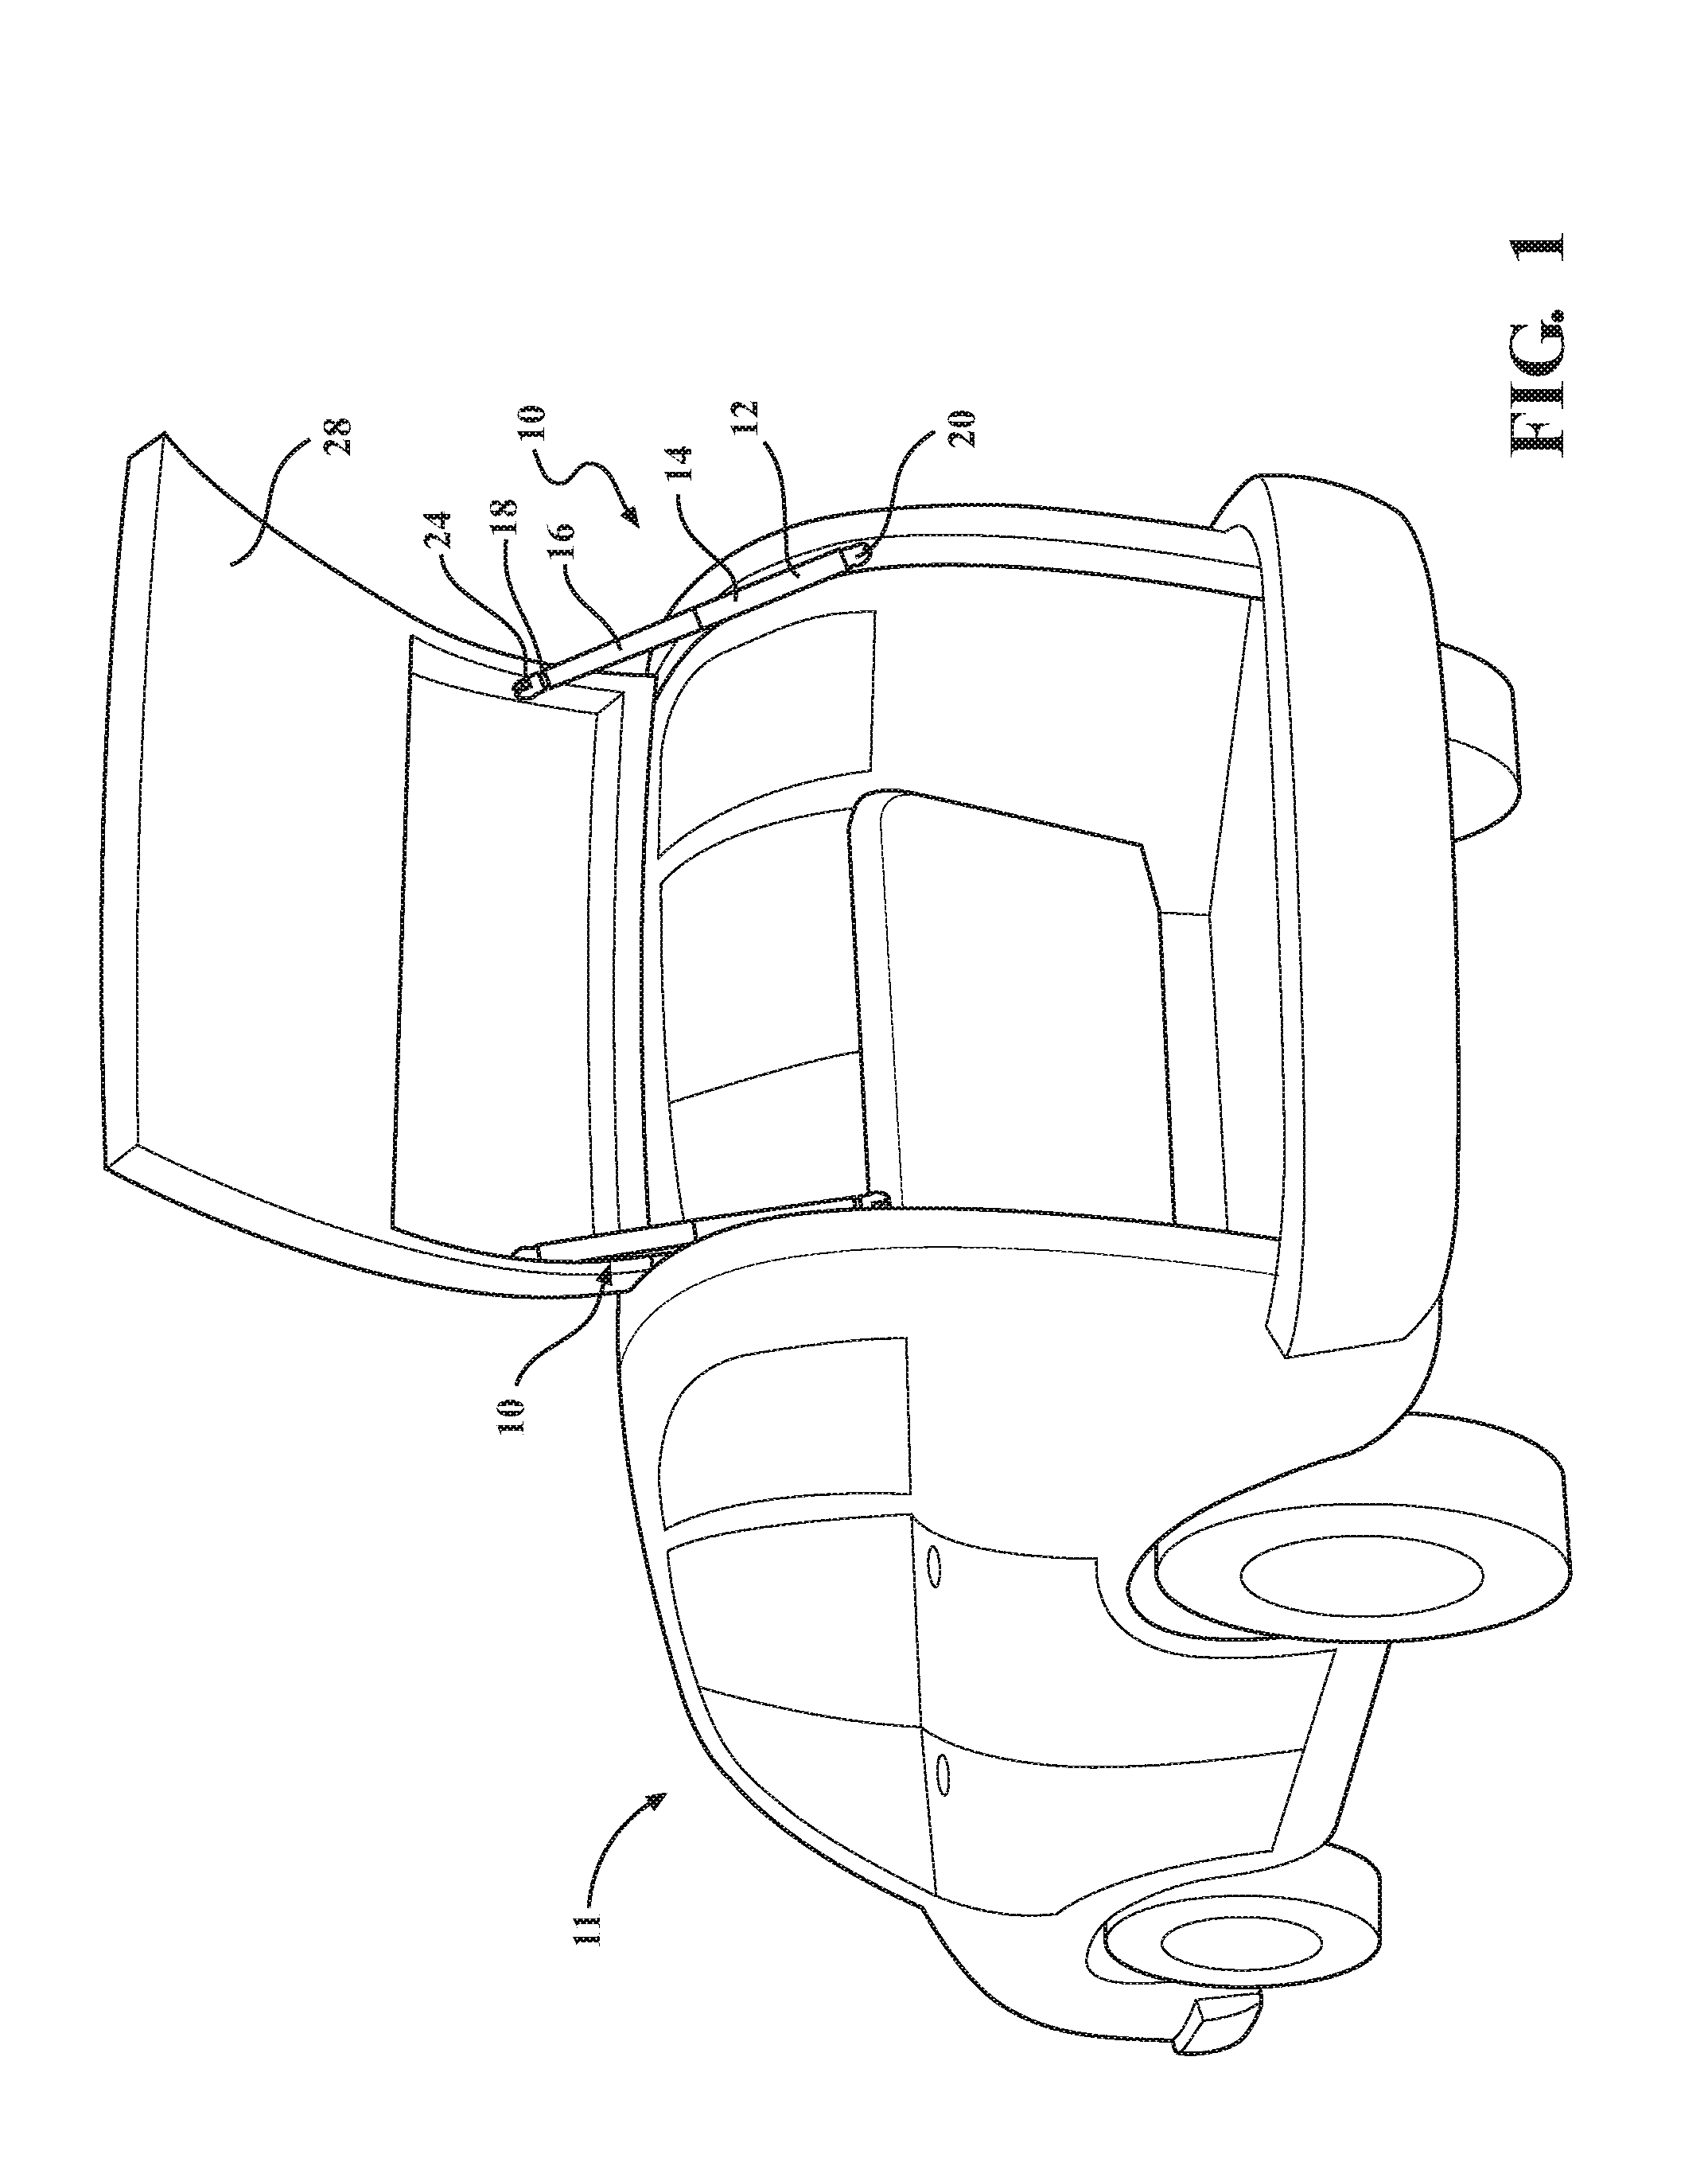 Electromechanical strut with electromechanical brake and method of allowing and preventing movement of a closure member of a vehicle